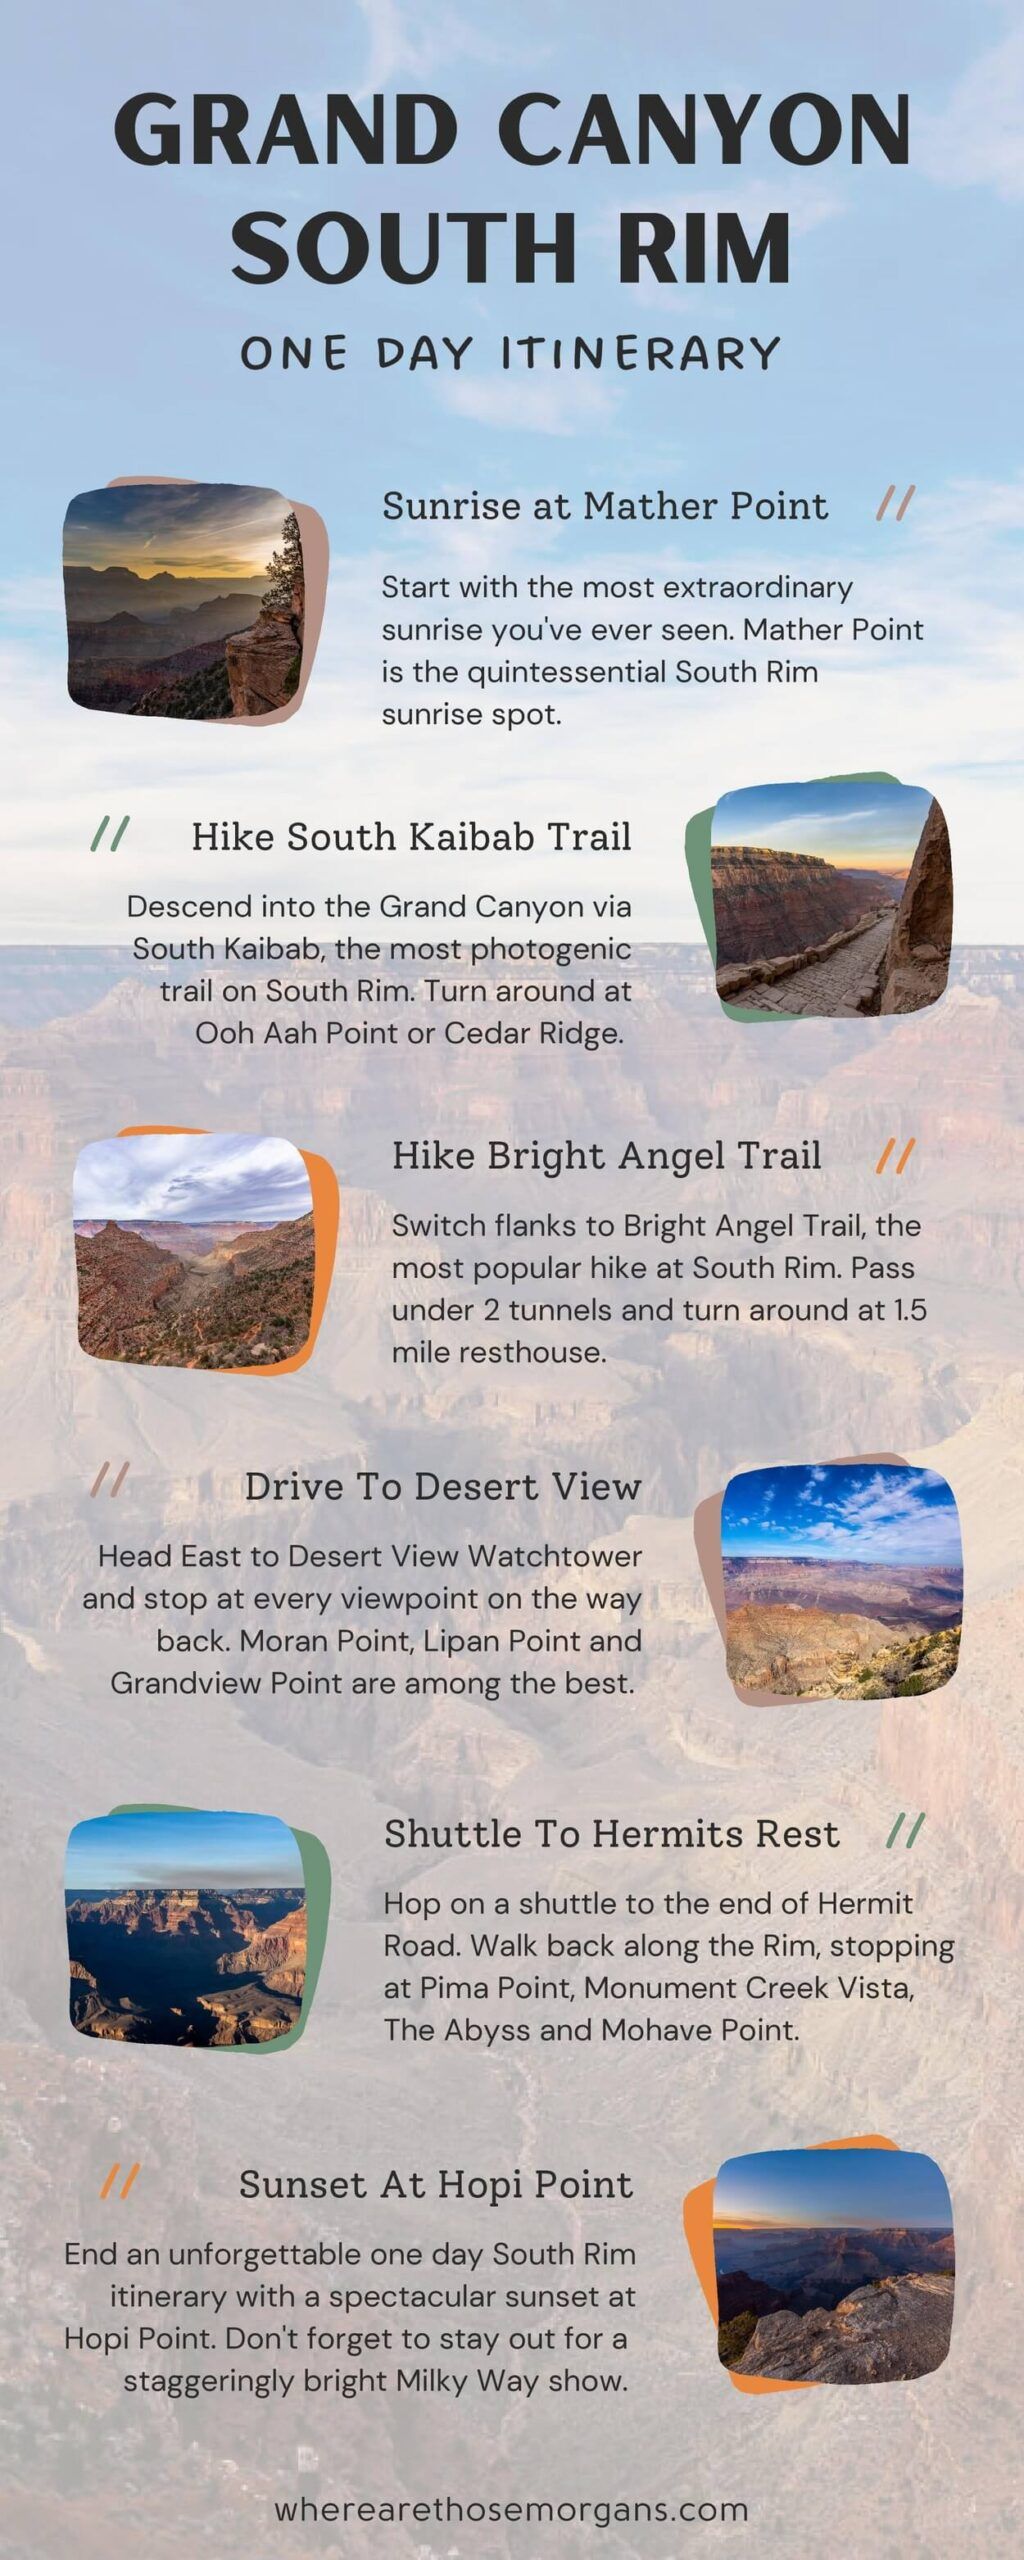 Infographic showing the best way to spend a one day itinerary at Grand Canyon South Rim in Arizona